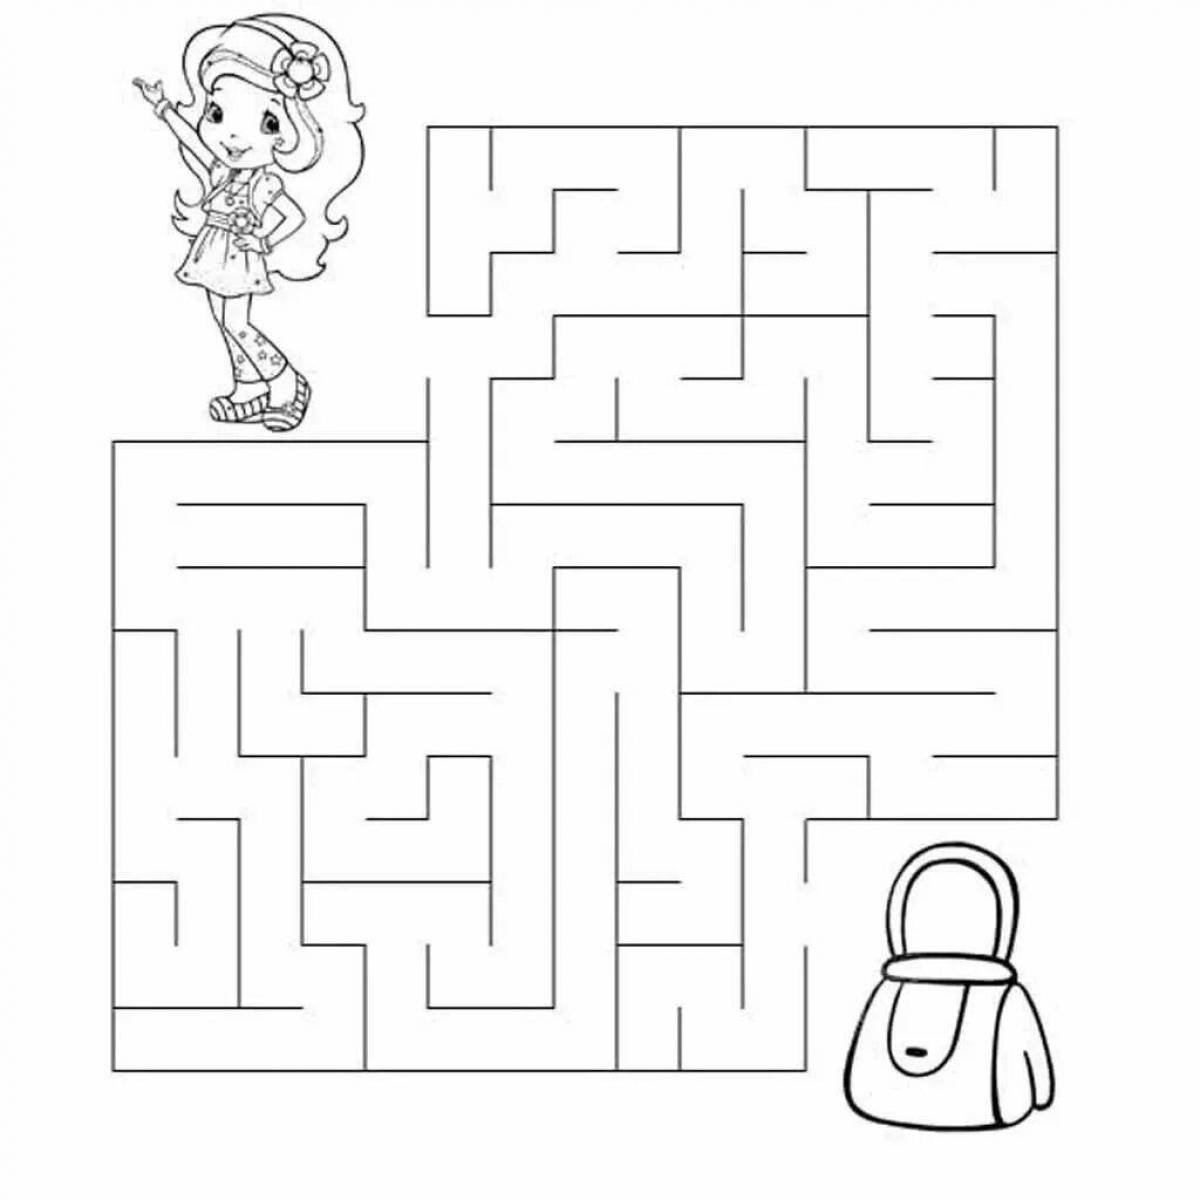 Mazes for children 4 5 years old #6